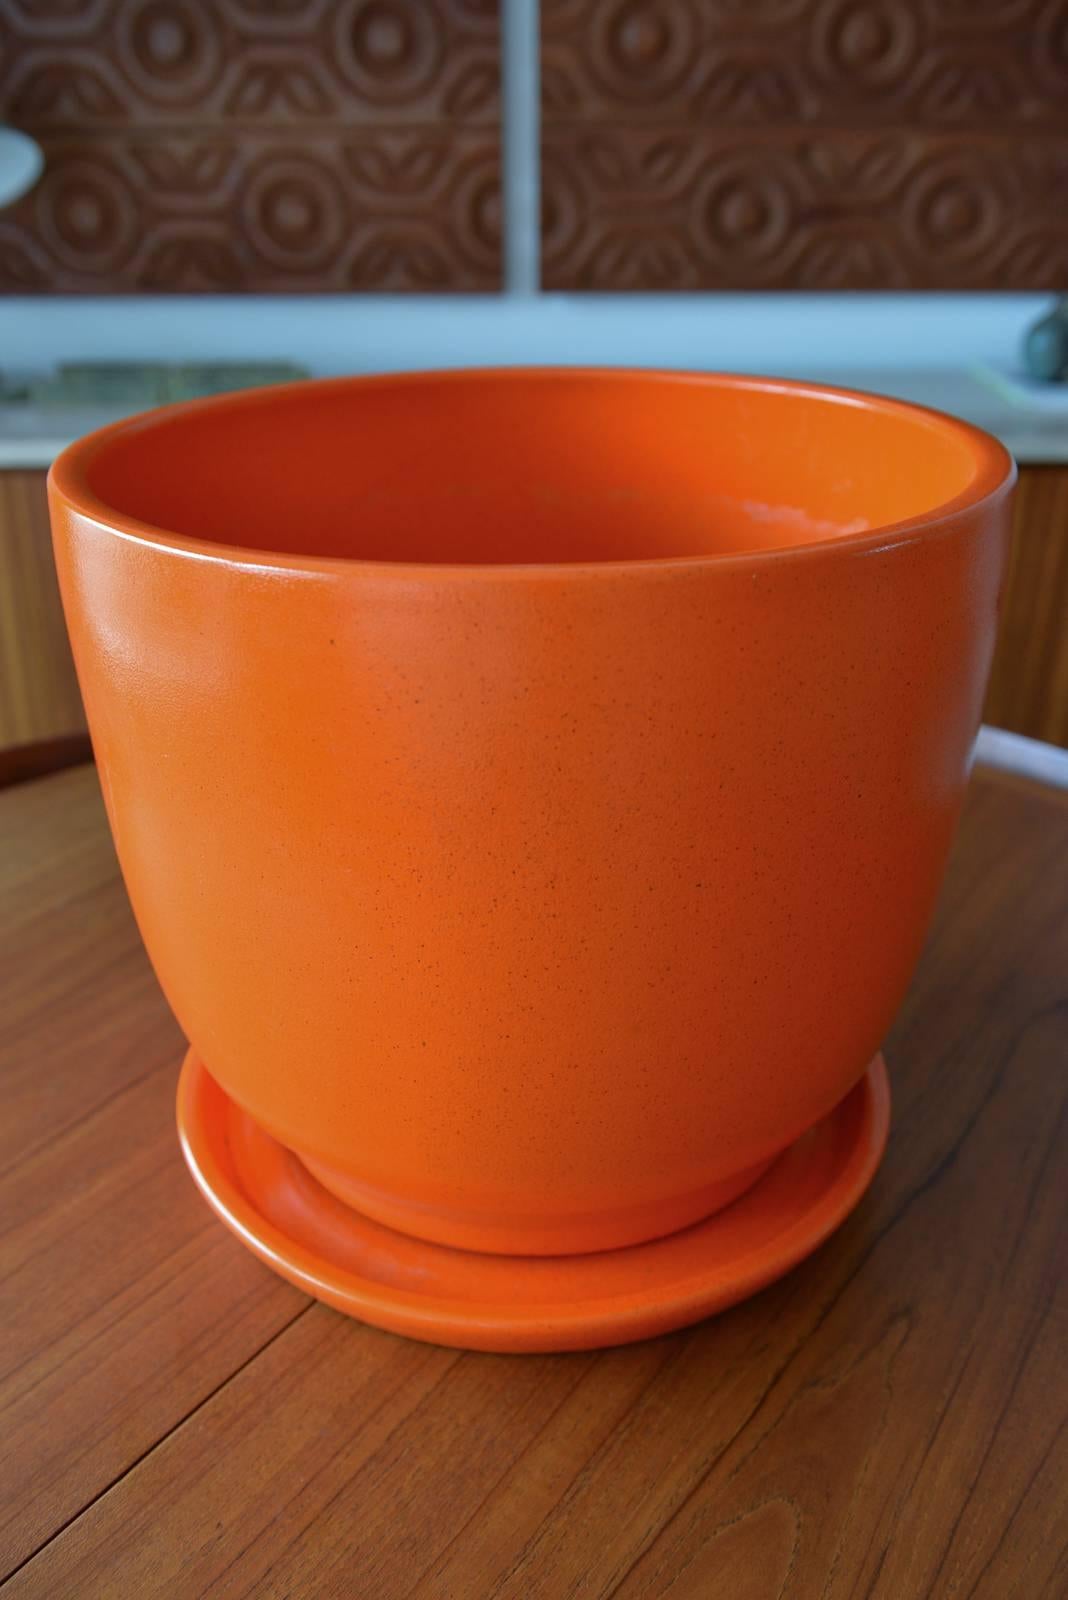 Large orange speckle gainey ceramic planter T-17 with matching orange speckle tray.

Model T-17 stands 15